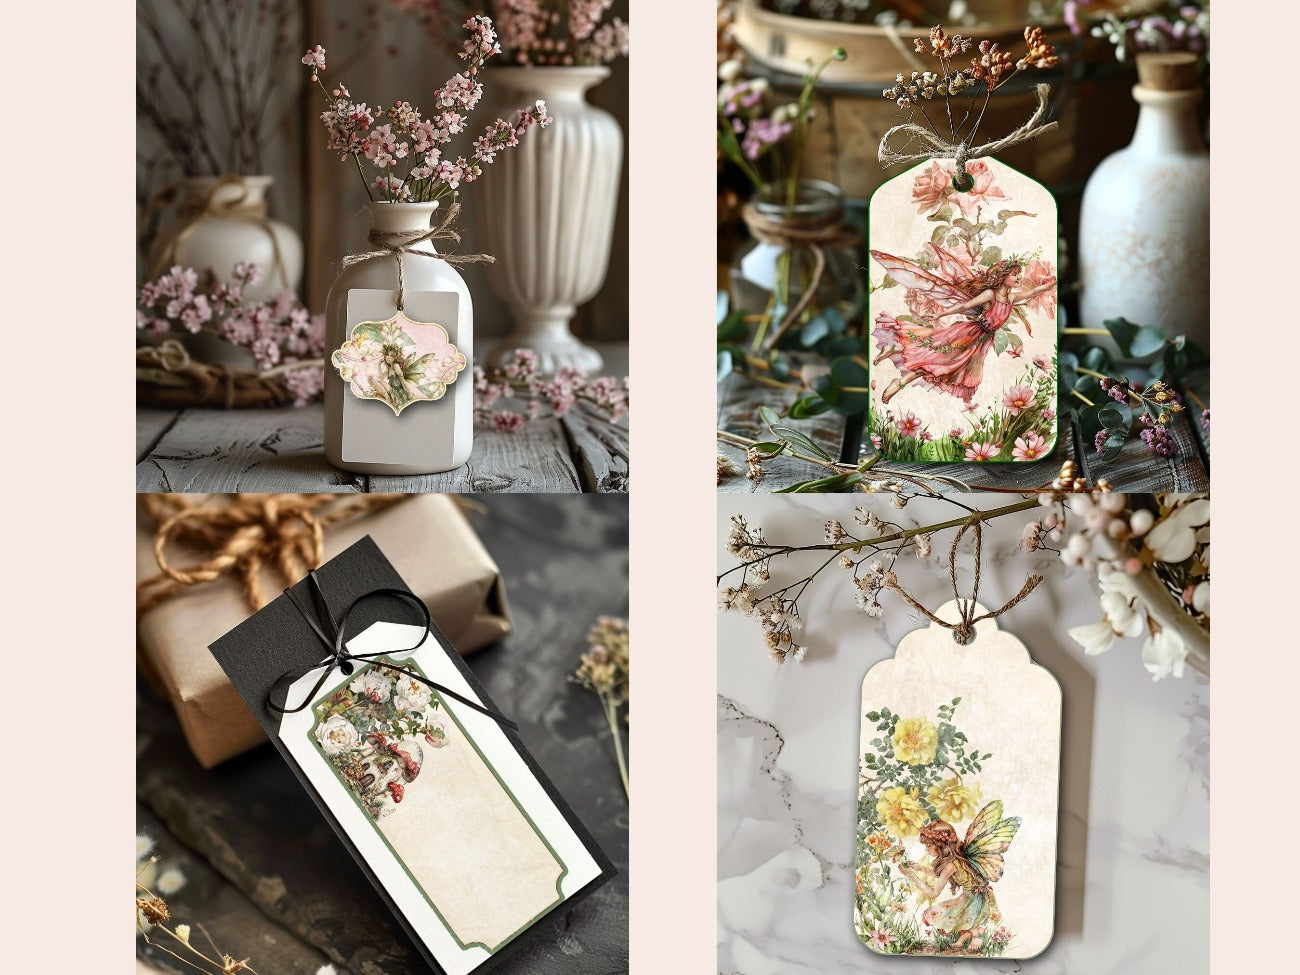 BELTANE LABELS are shown in four images of the labels applied to a gift, a flowering tree branch, a vase, and a shabby chic plant pot - Morgana Magick Spell